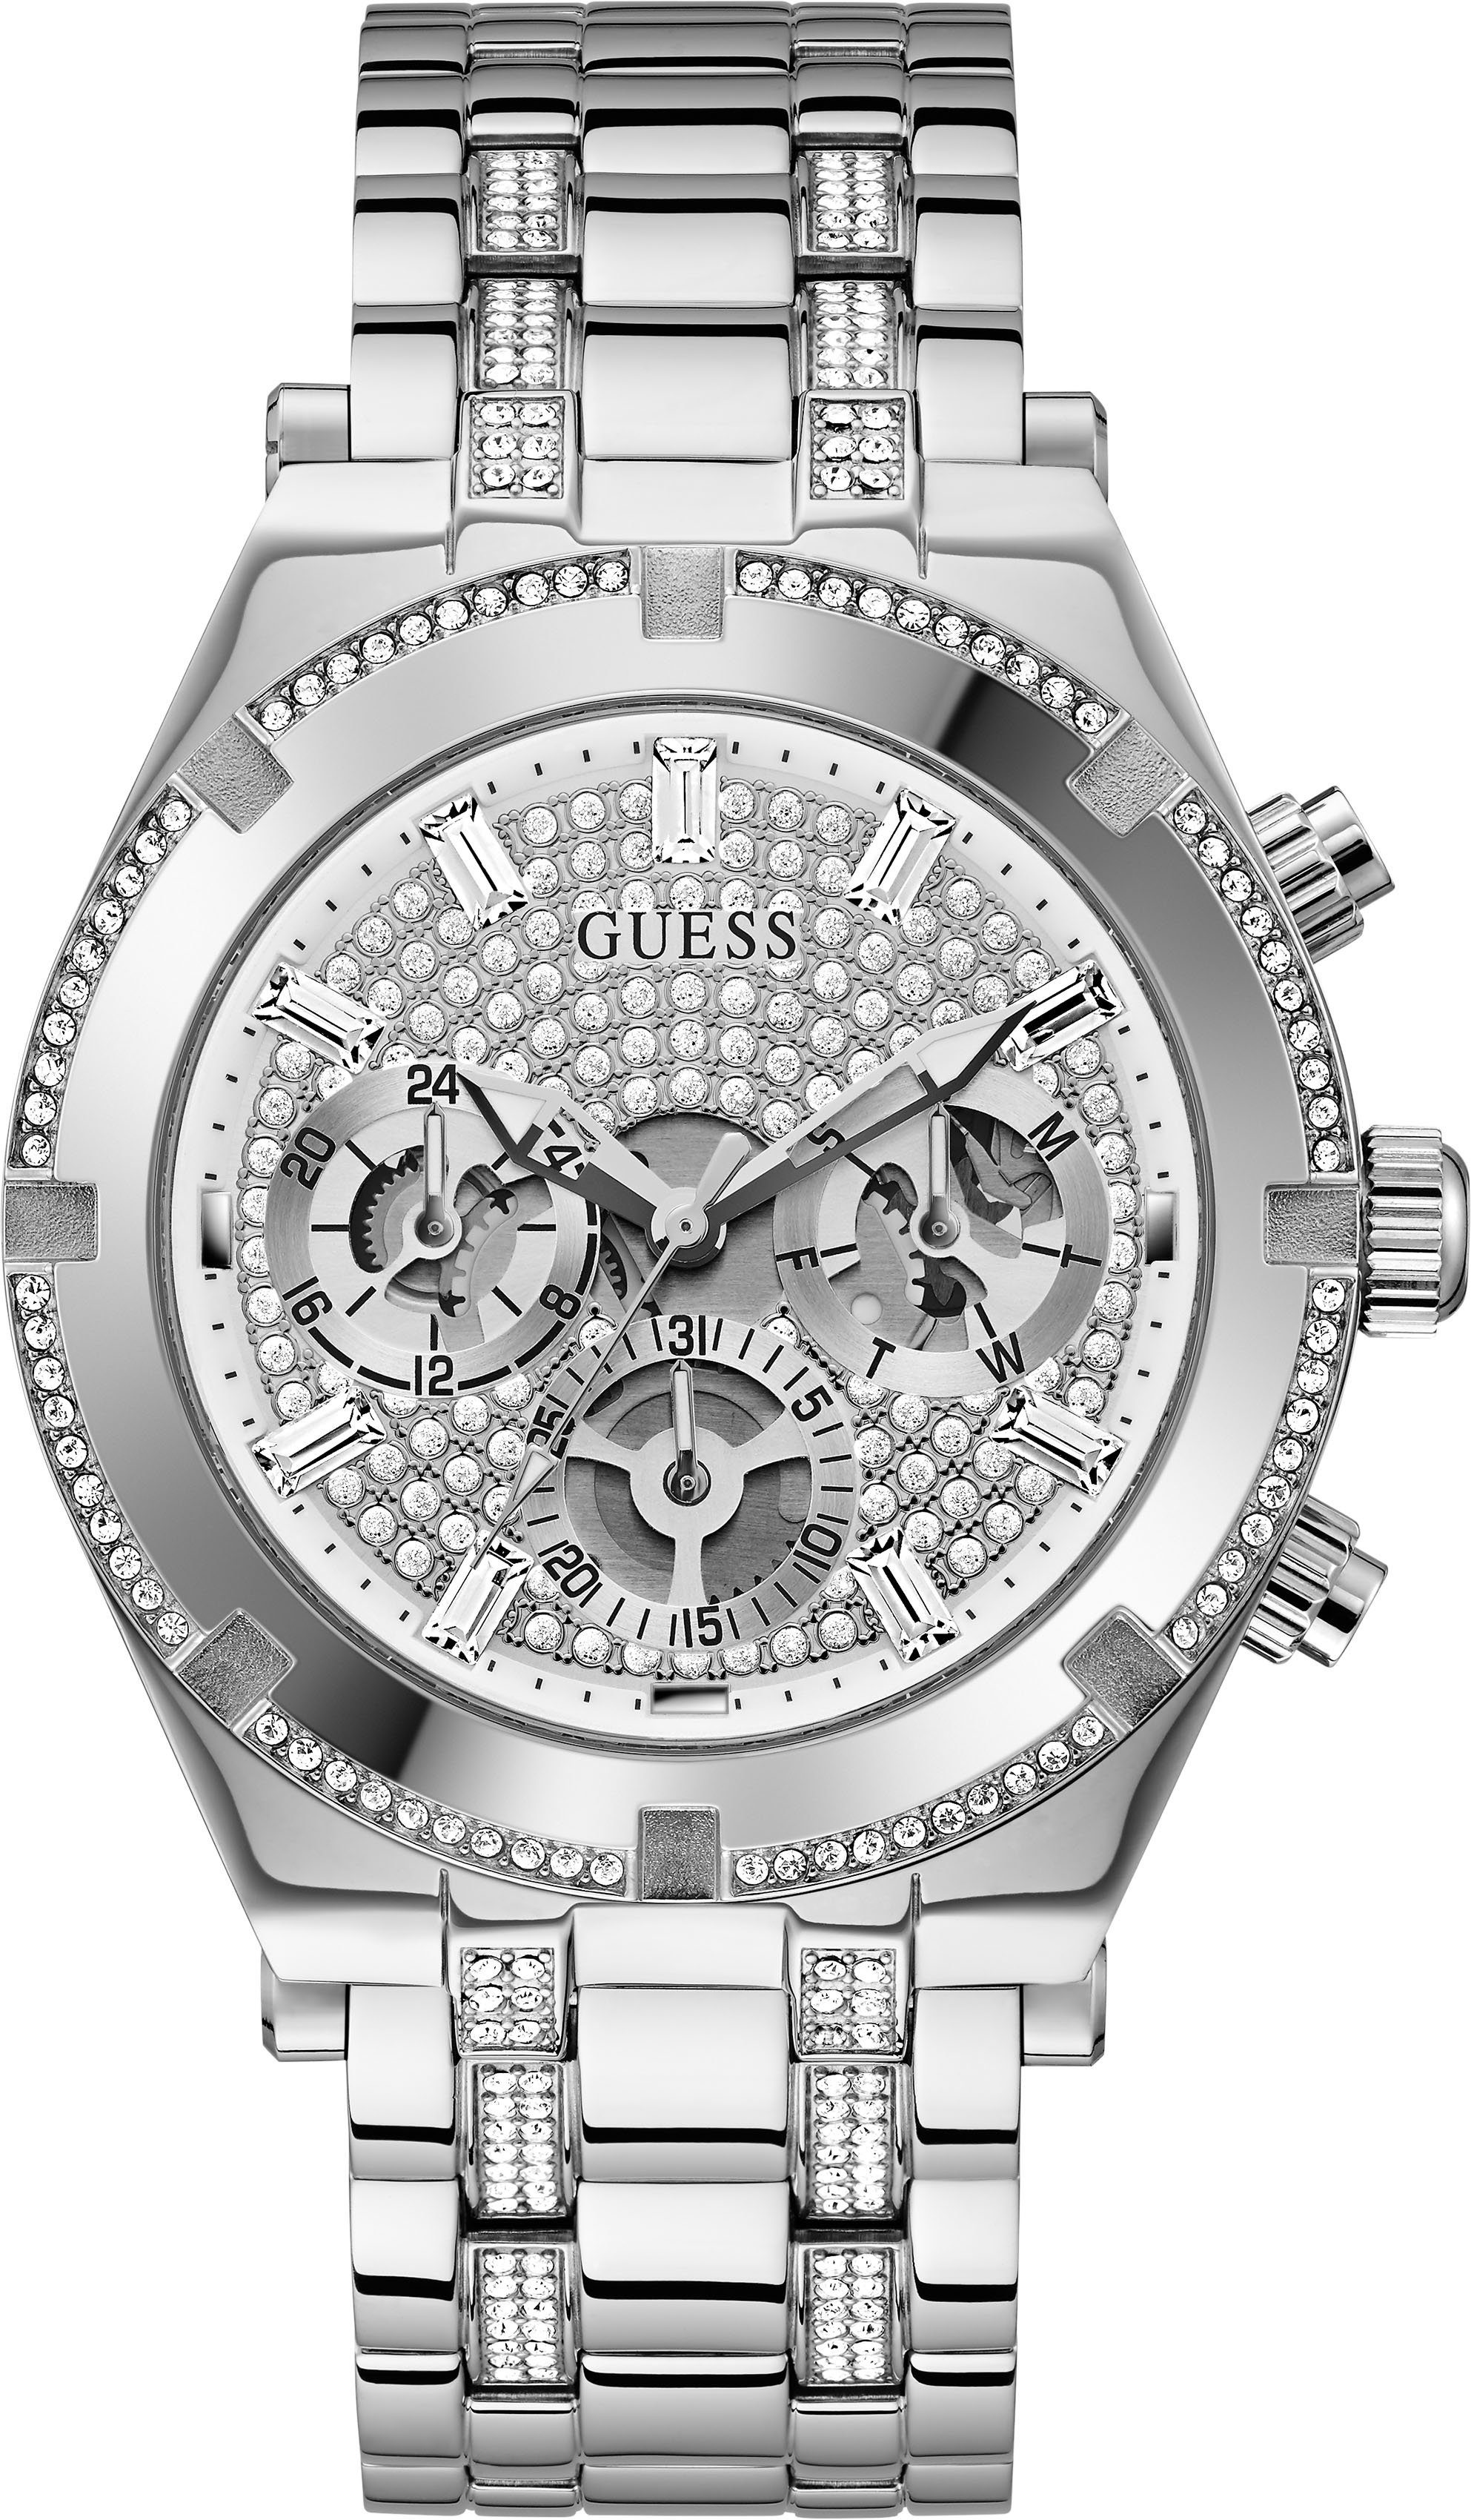 Guess Multifunktionsuhr CONTINENTAL, GW0261G1